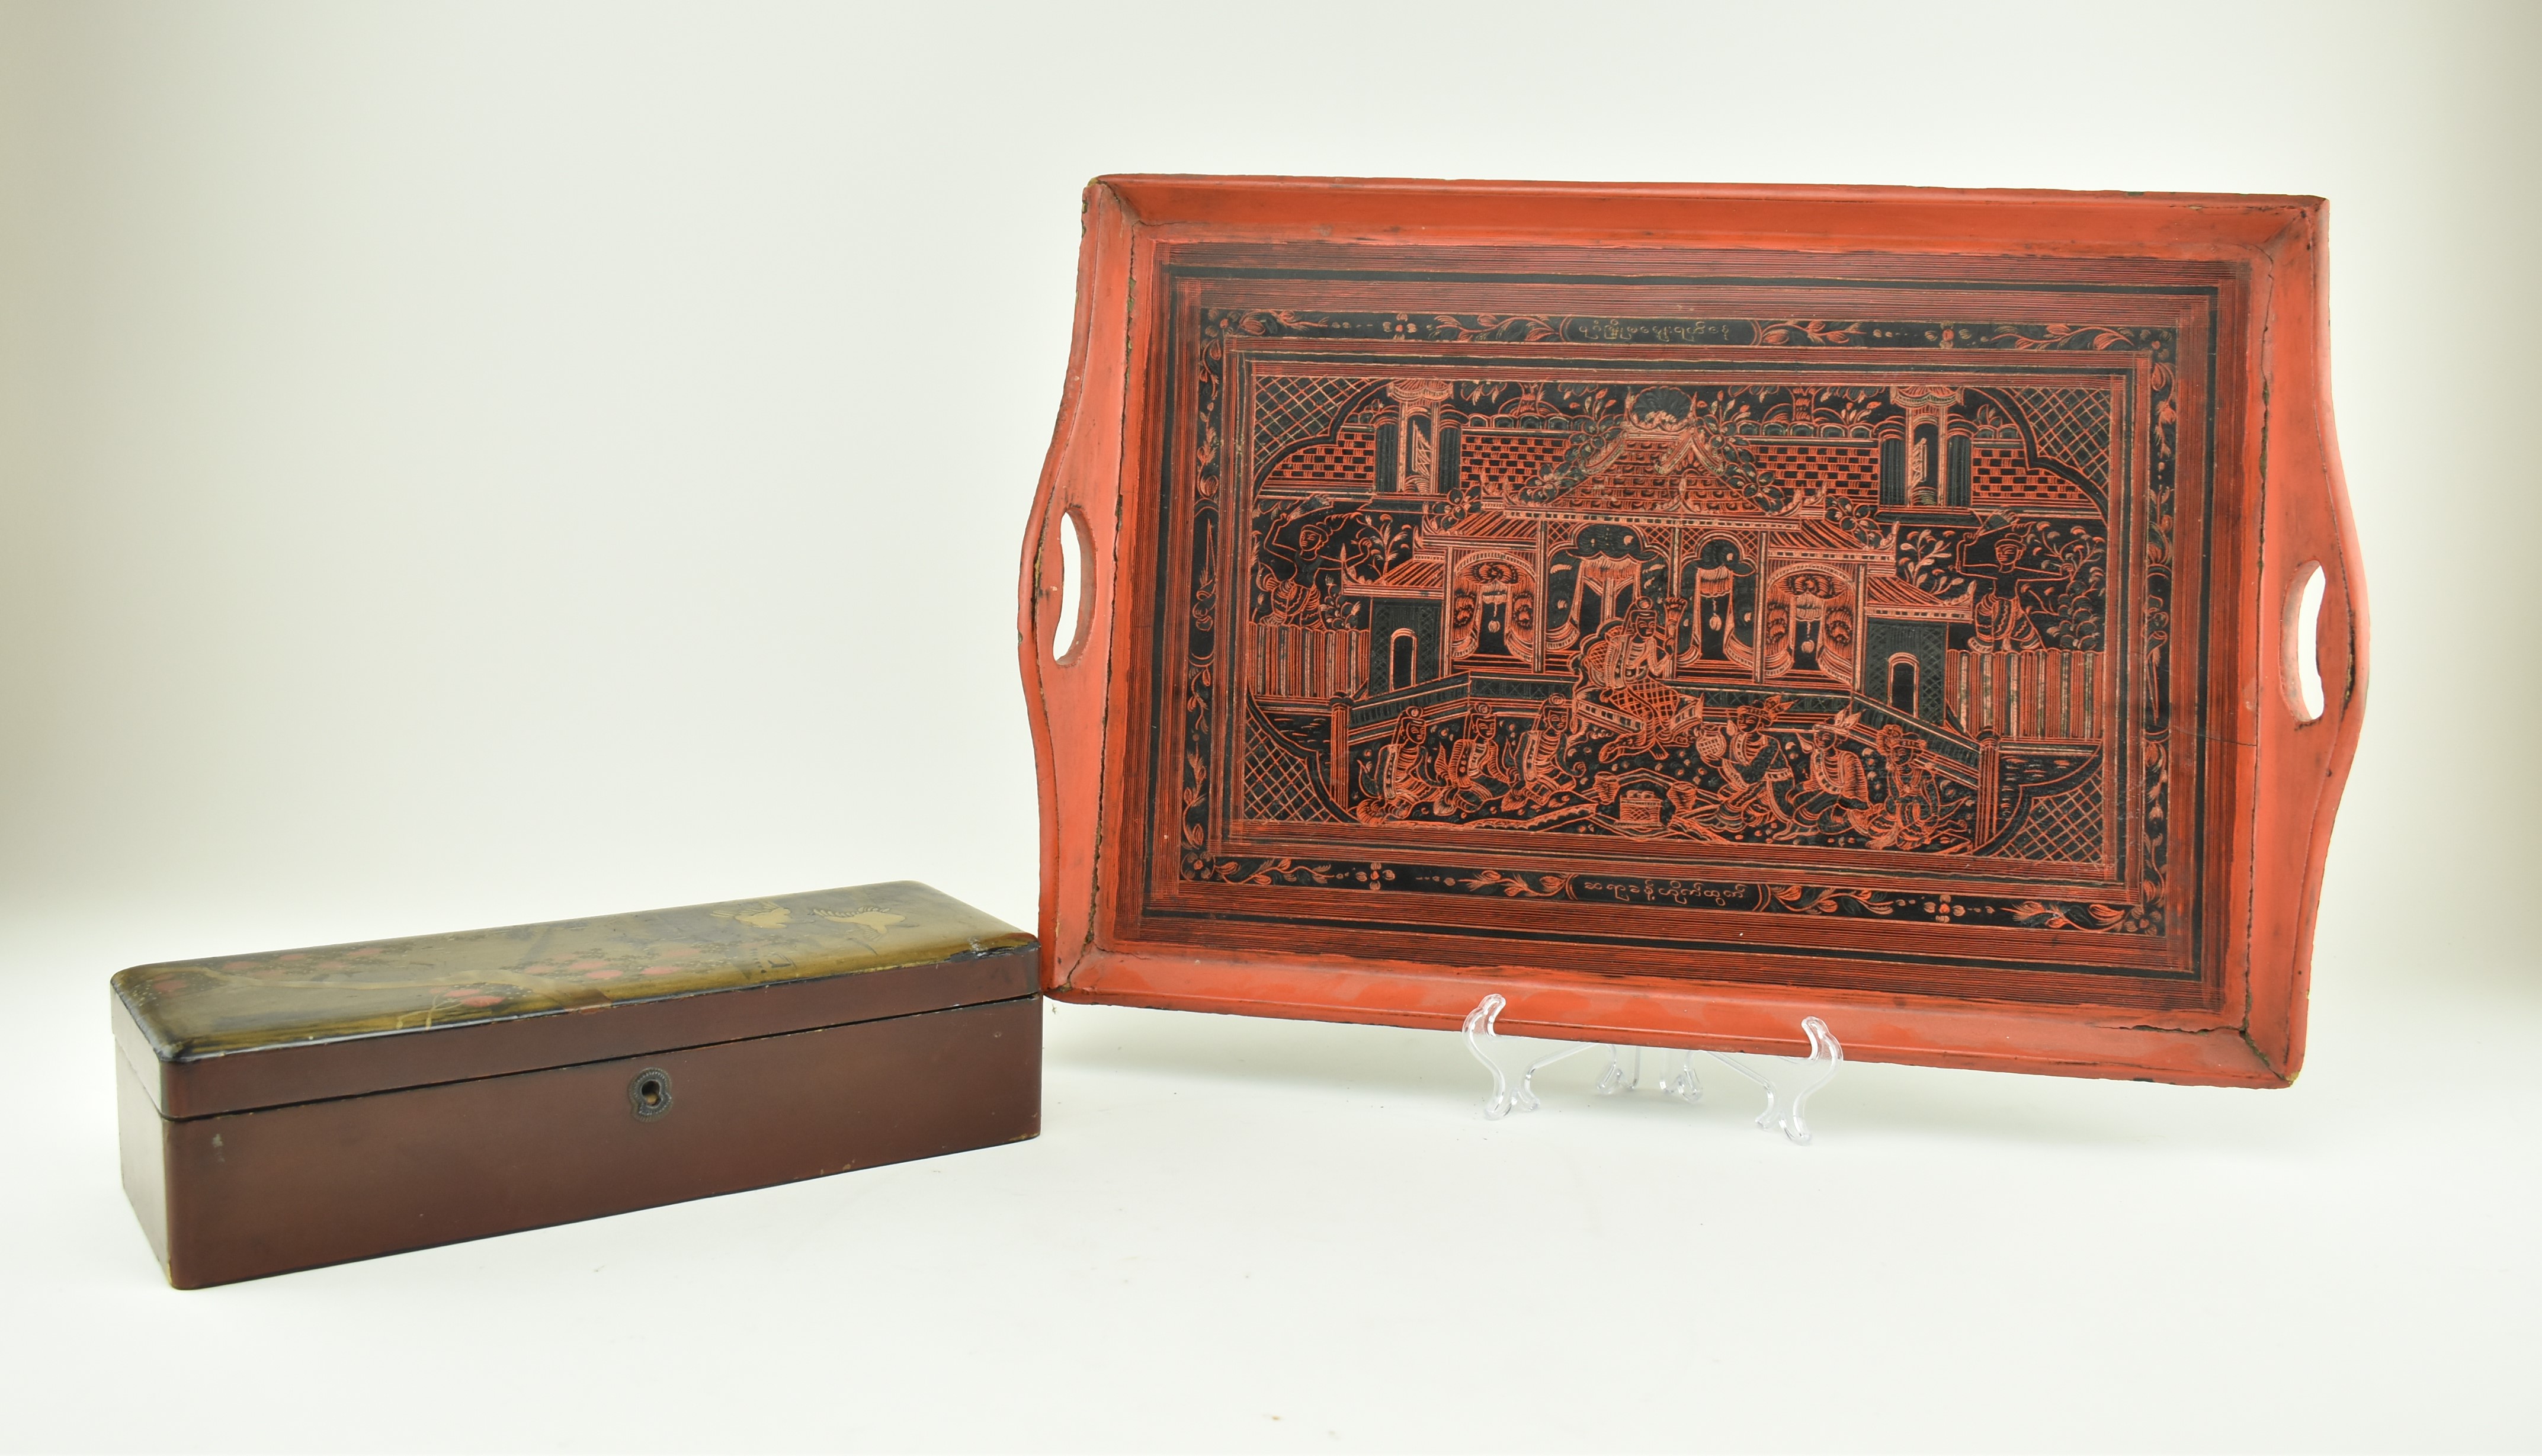 BURMESE RED LACQUERED TRAY & A LACQUER GILT LIDDED BOX